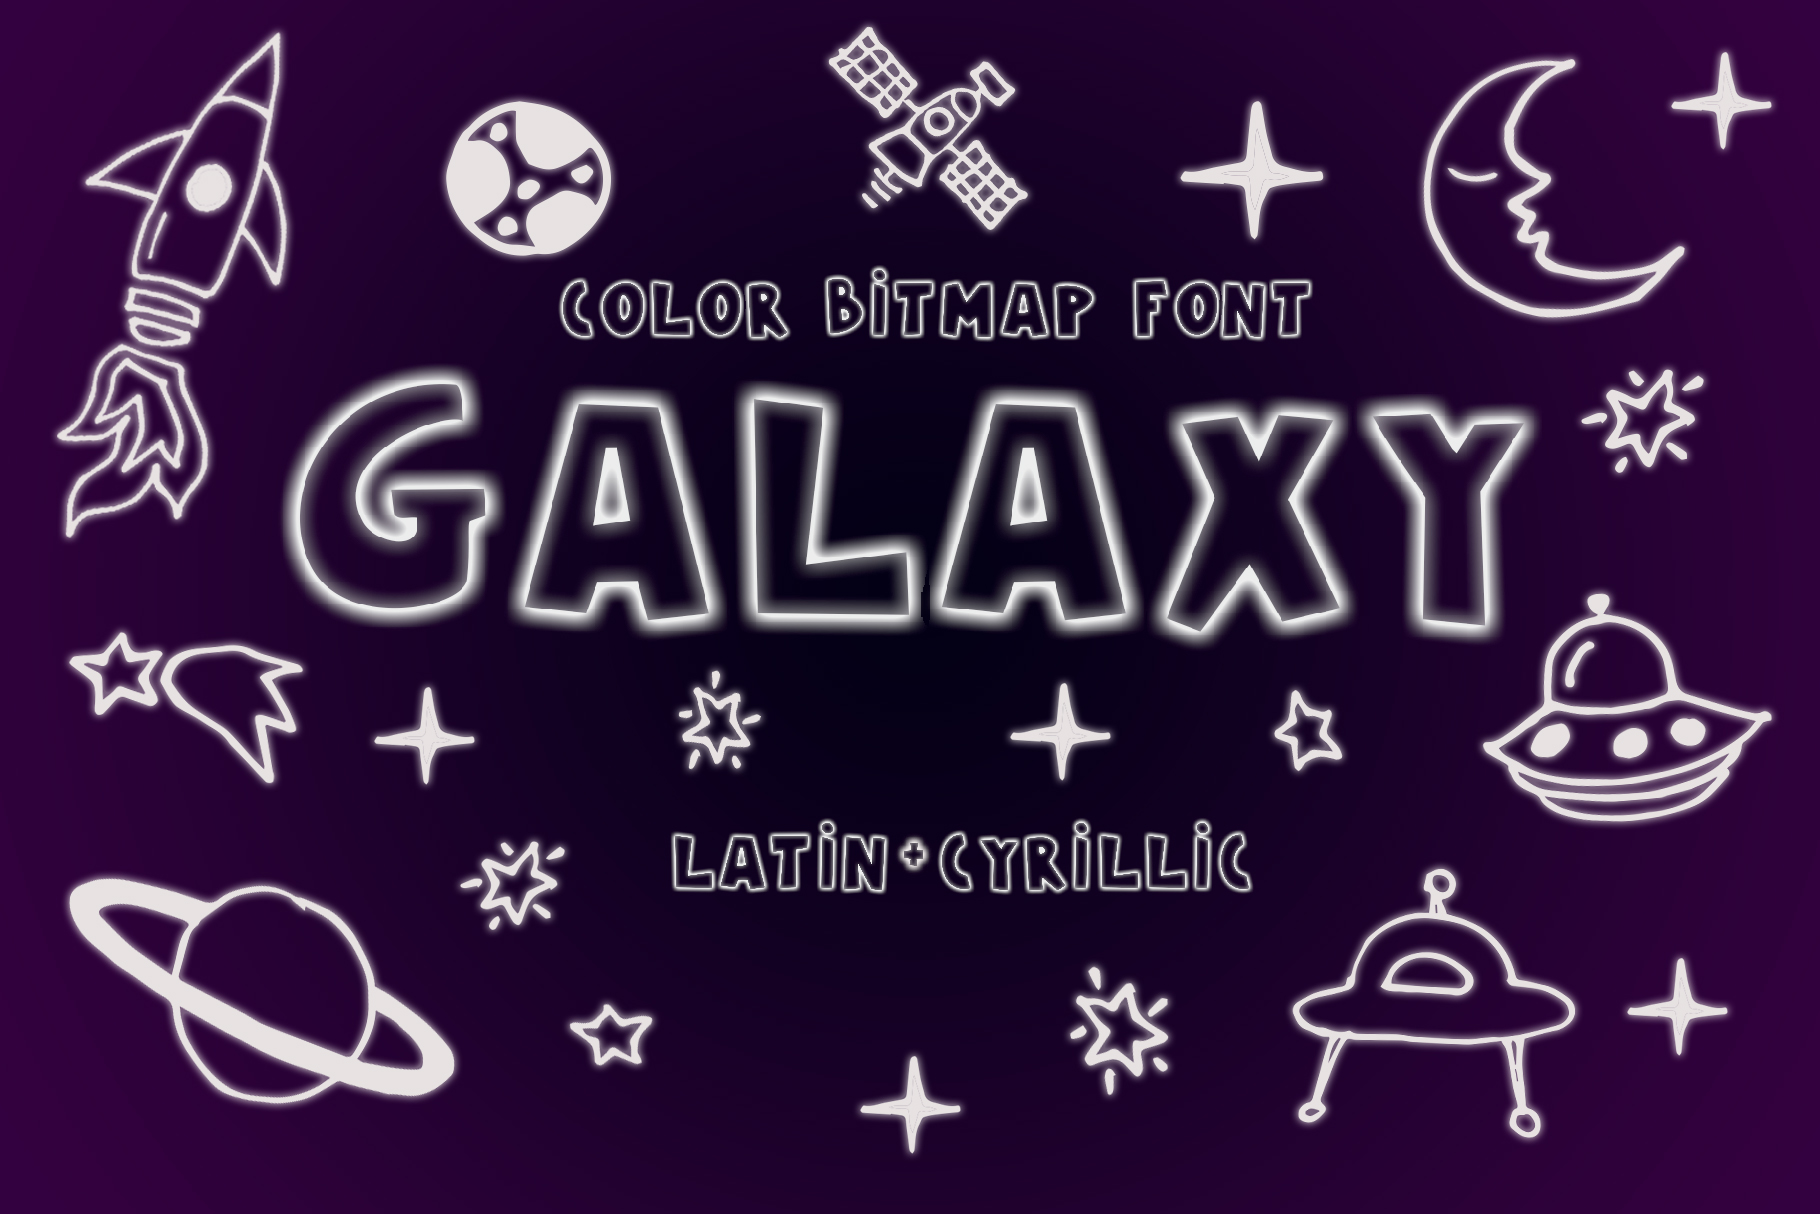 Galaxy Color Bitmap Font - cover image.